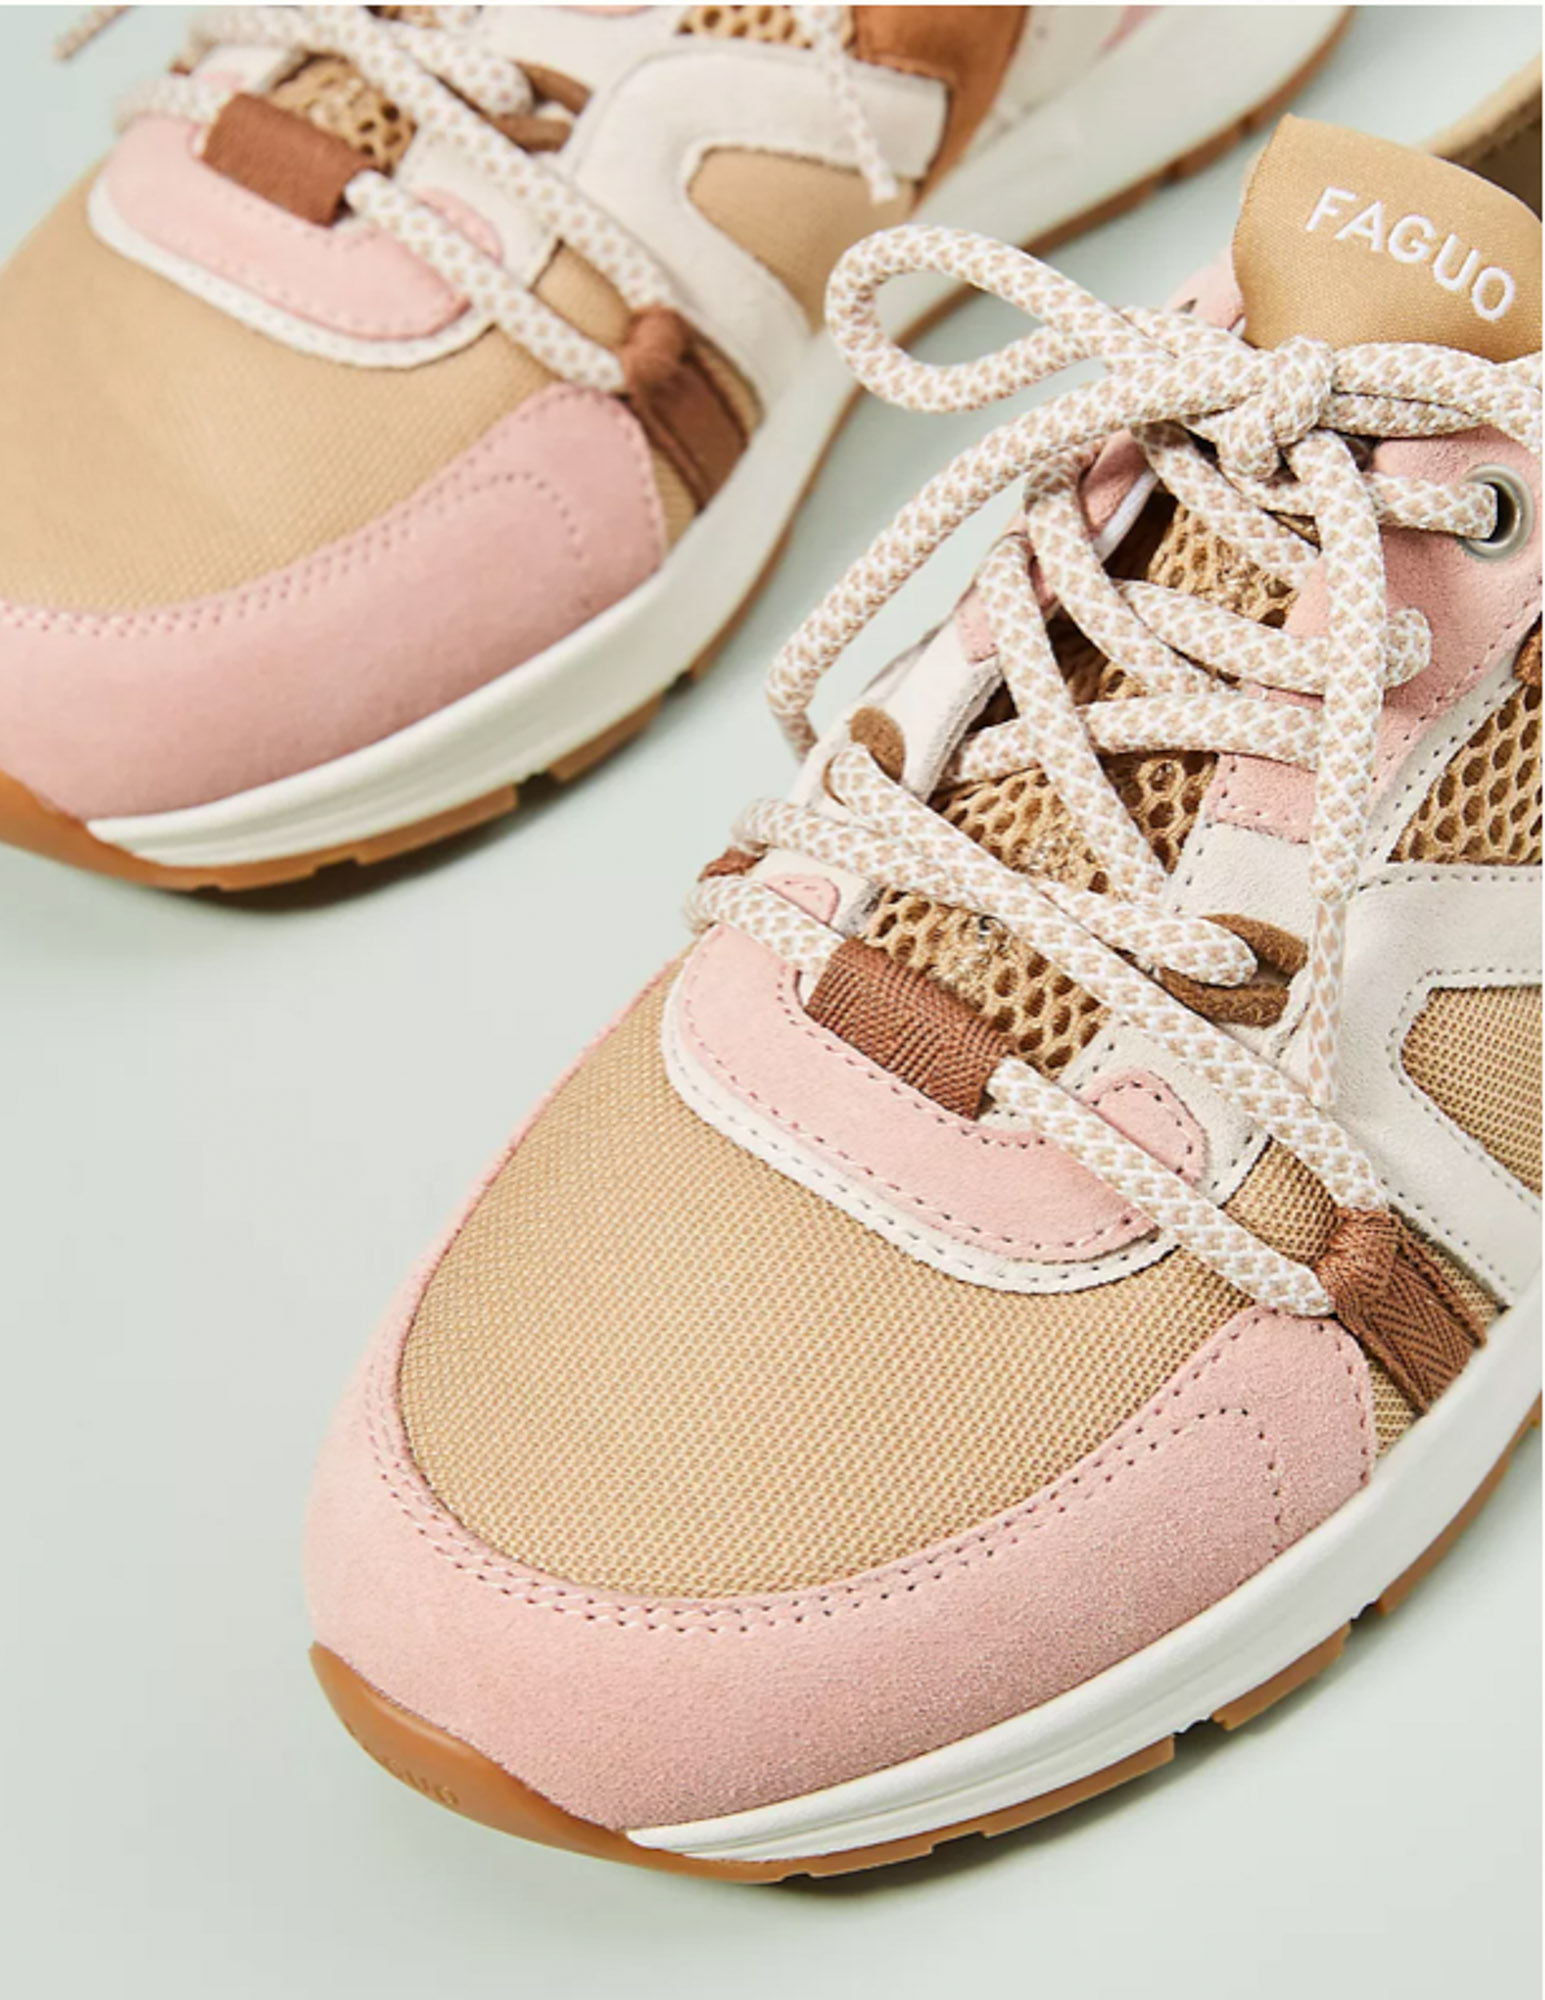 Fuego Willow retro sneaks in pink at Anthropologie.